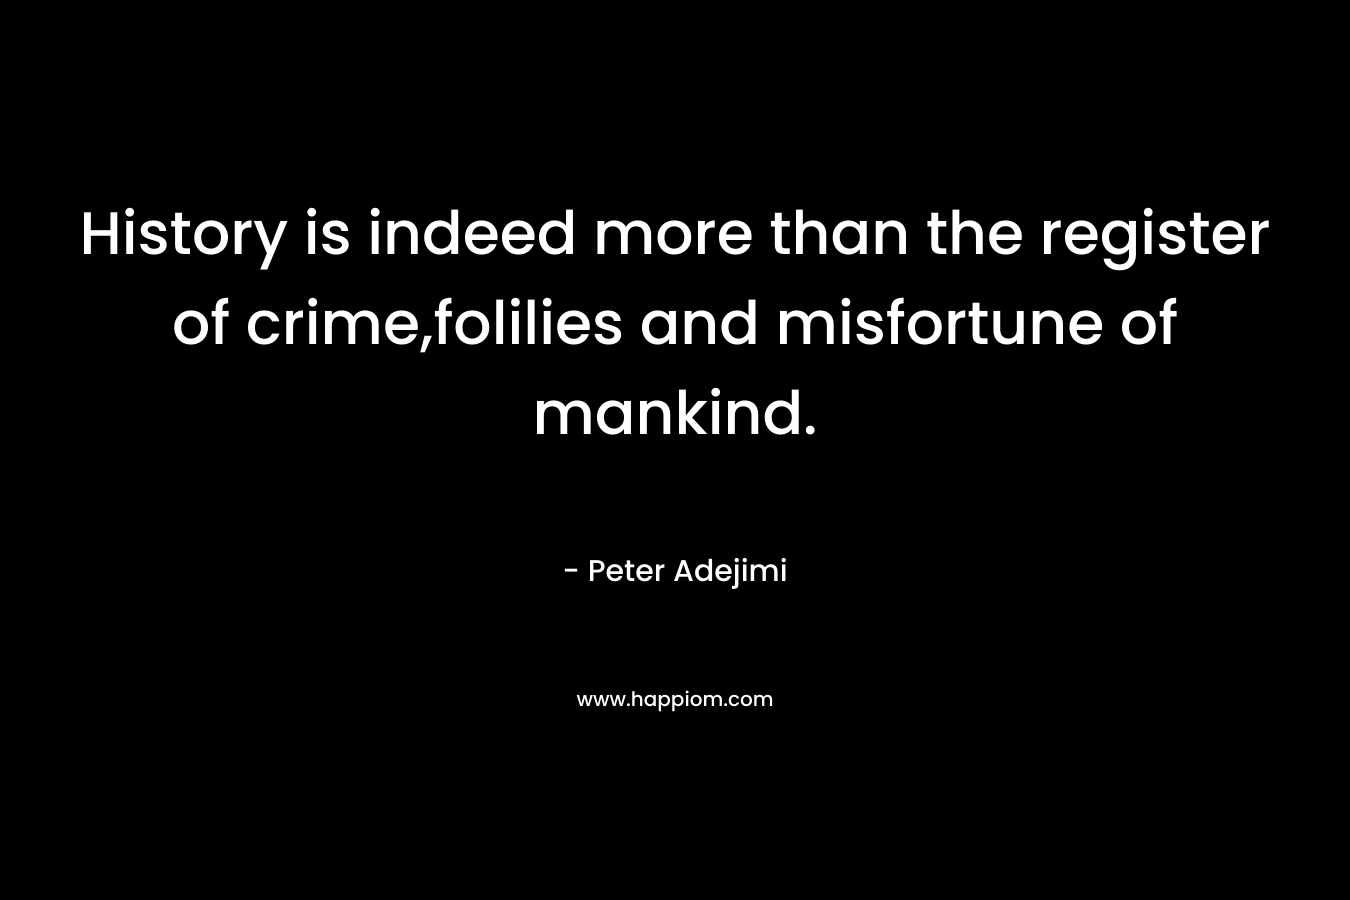 History is indeed more than the register of crime,folilies and misfortune of mankind.